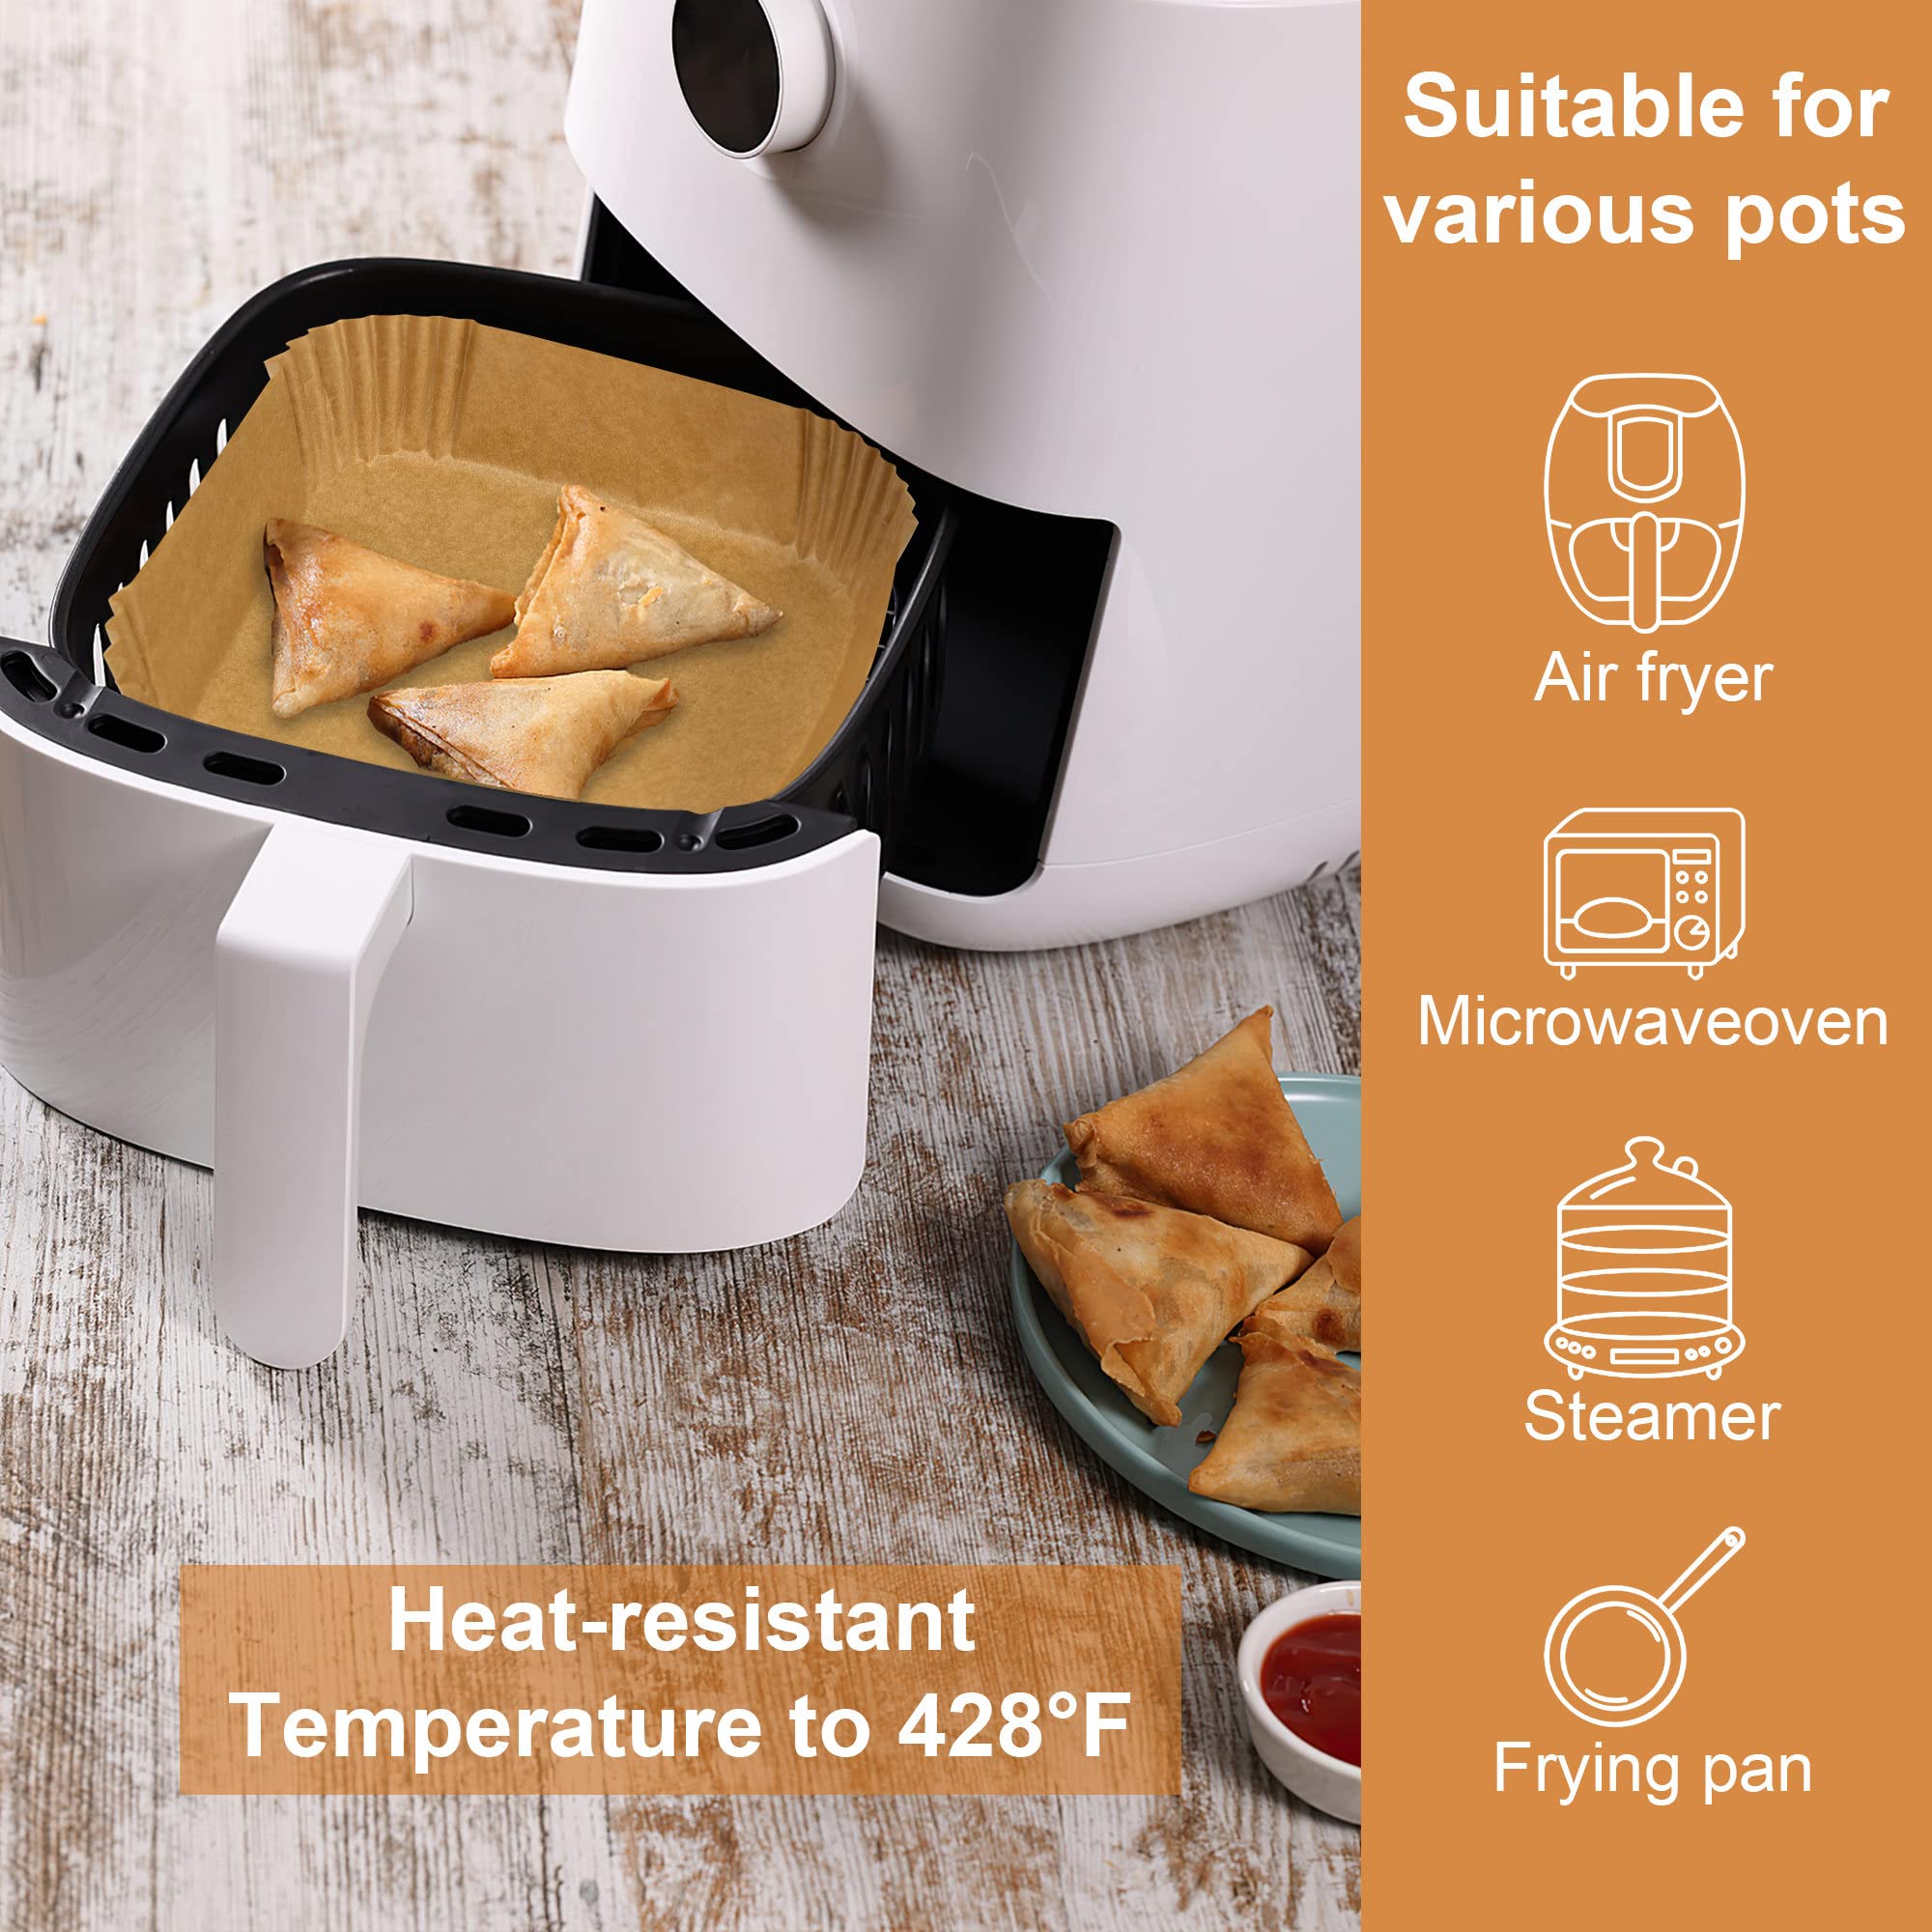 Air Fryer Disposable Paper Liner, 6.3 Inch 100PCS Square, Non-Stick Baking Paper, Oil Proof, Water Proof, Food Grade Parchment for Baking Frying Microwave Steam